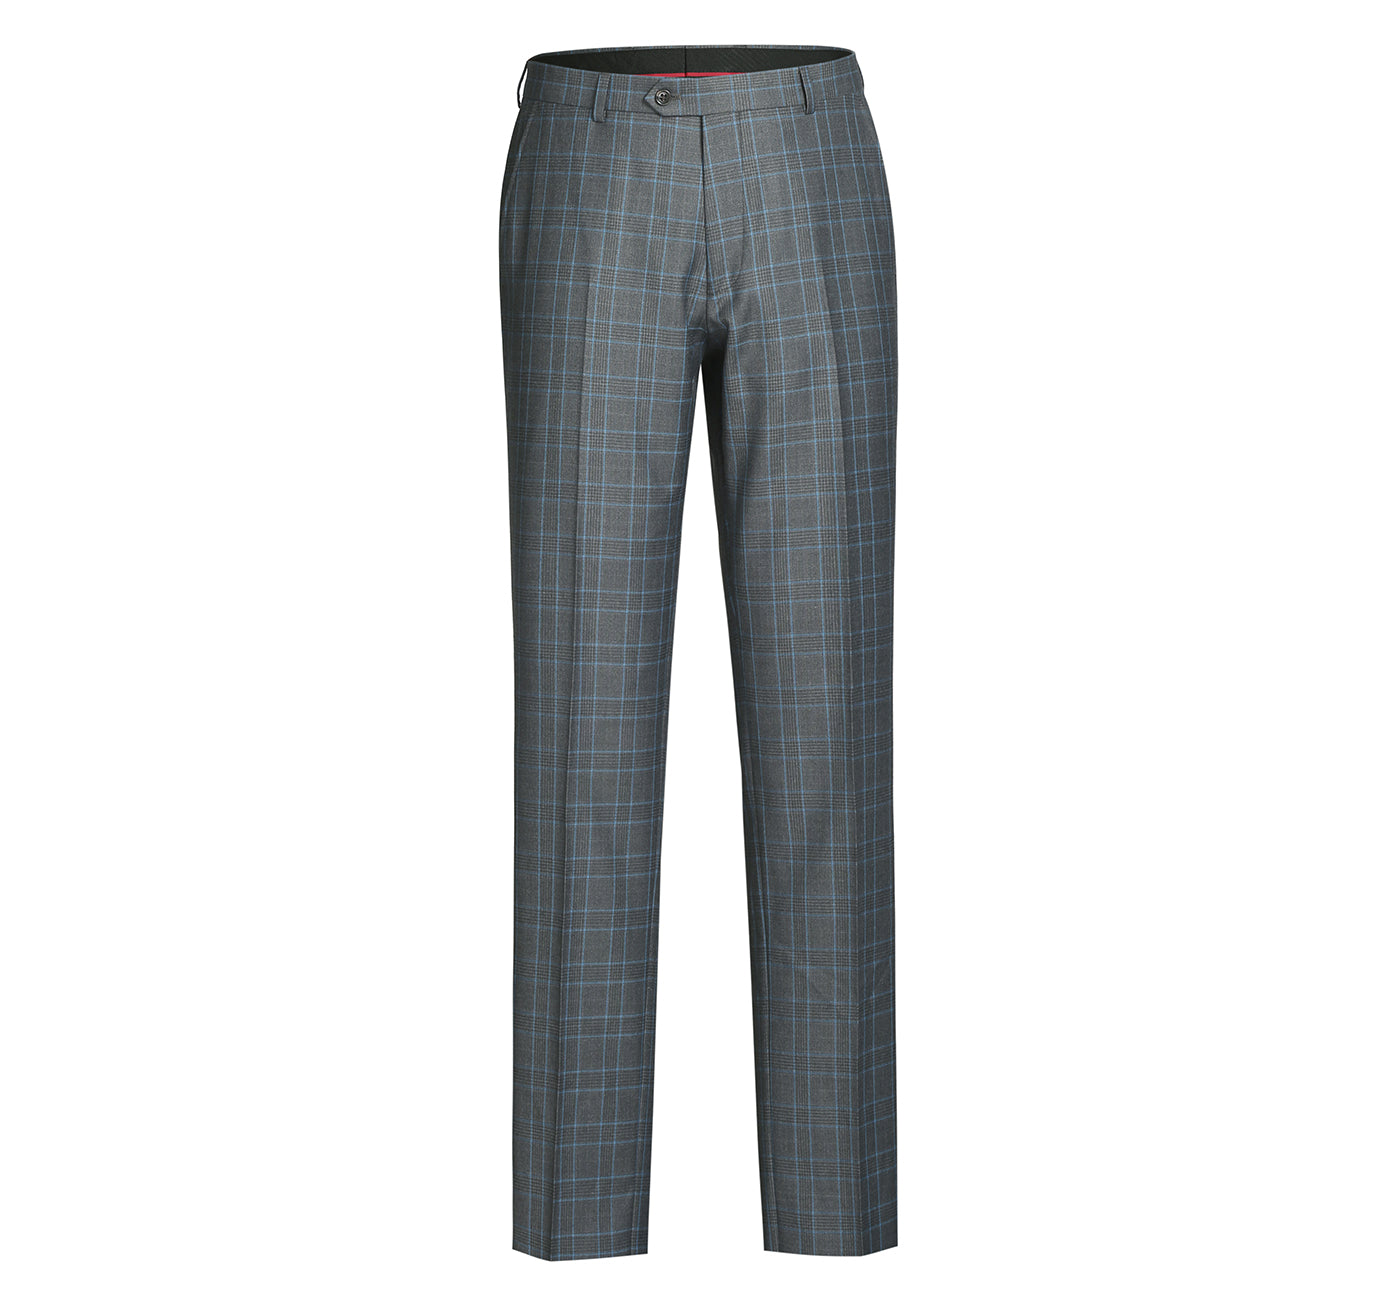 293-5 Men's Two Piece Classic Fit Grey and Teal Windowpane Check Suit